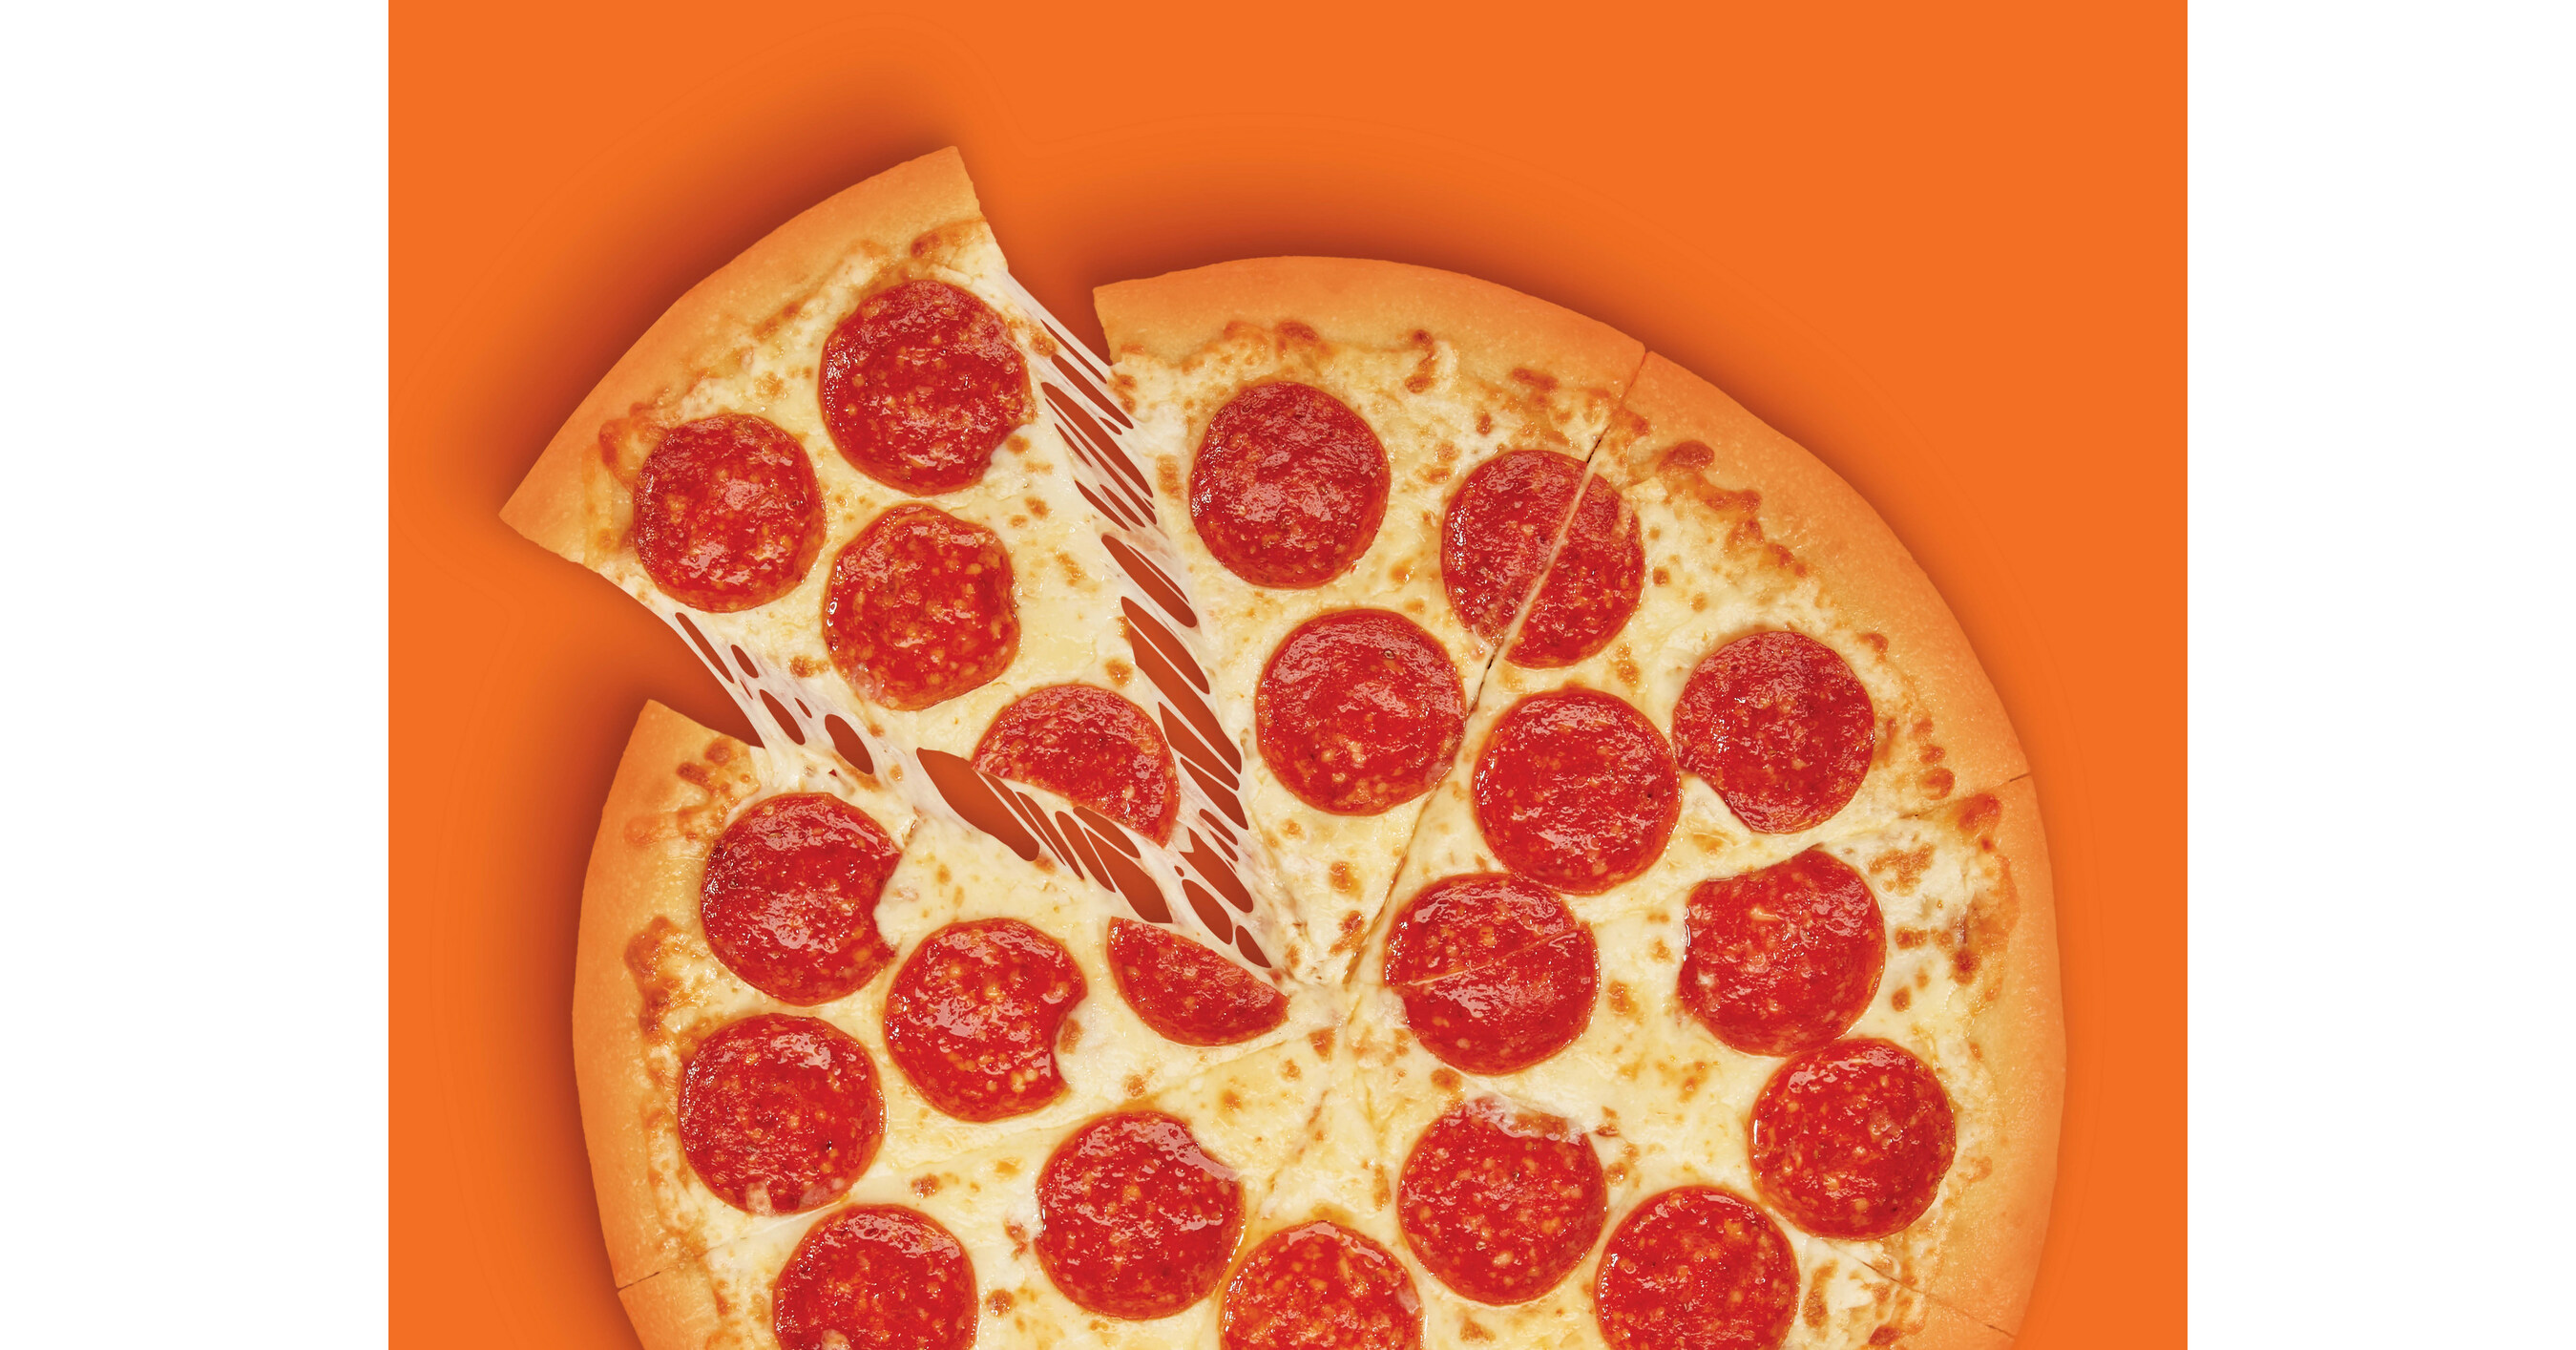 Updated Little Caesars Menu Prices + Hot-N-READY Items (2023)